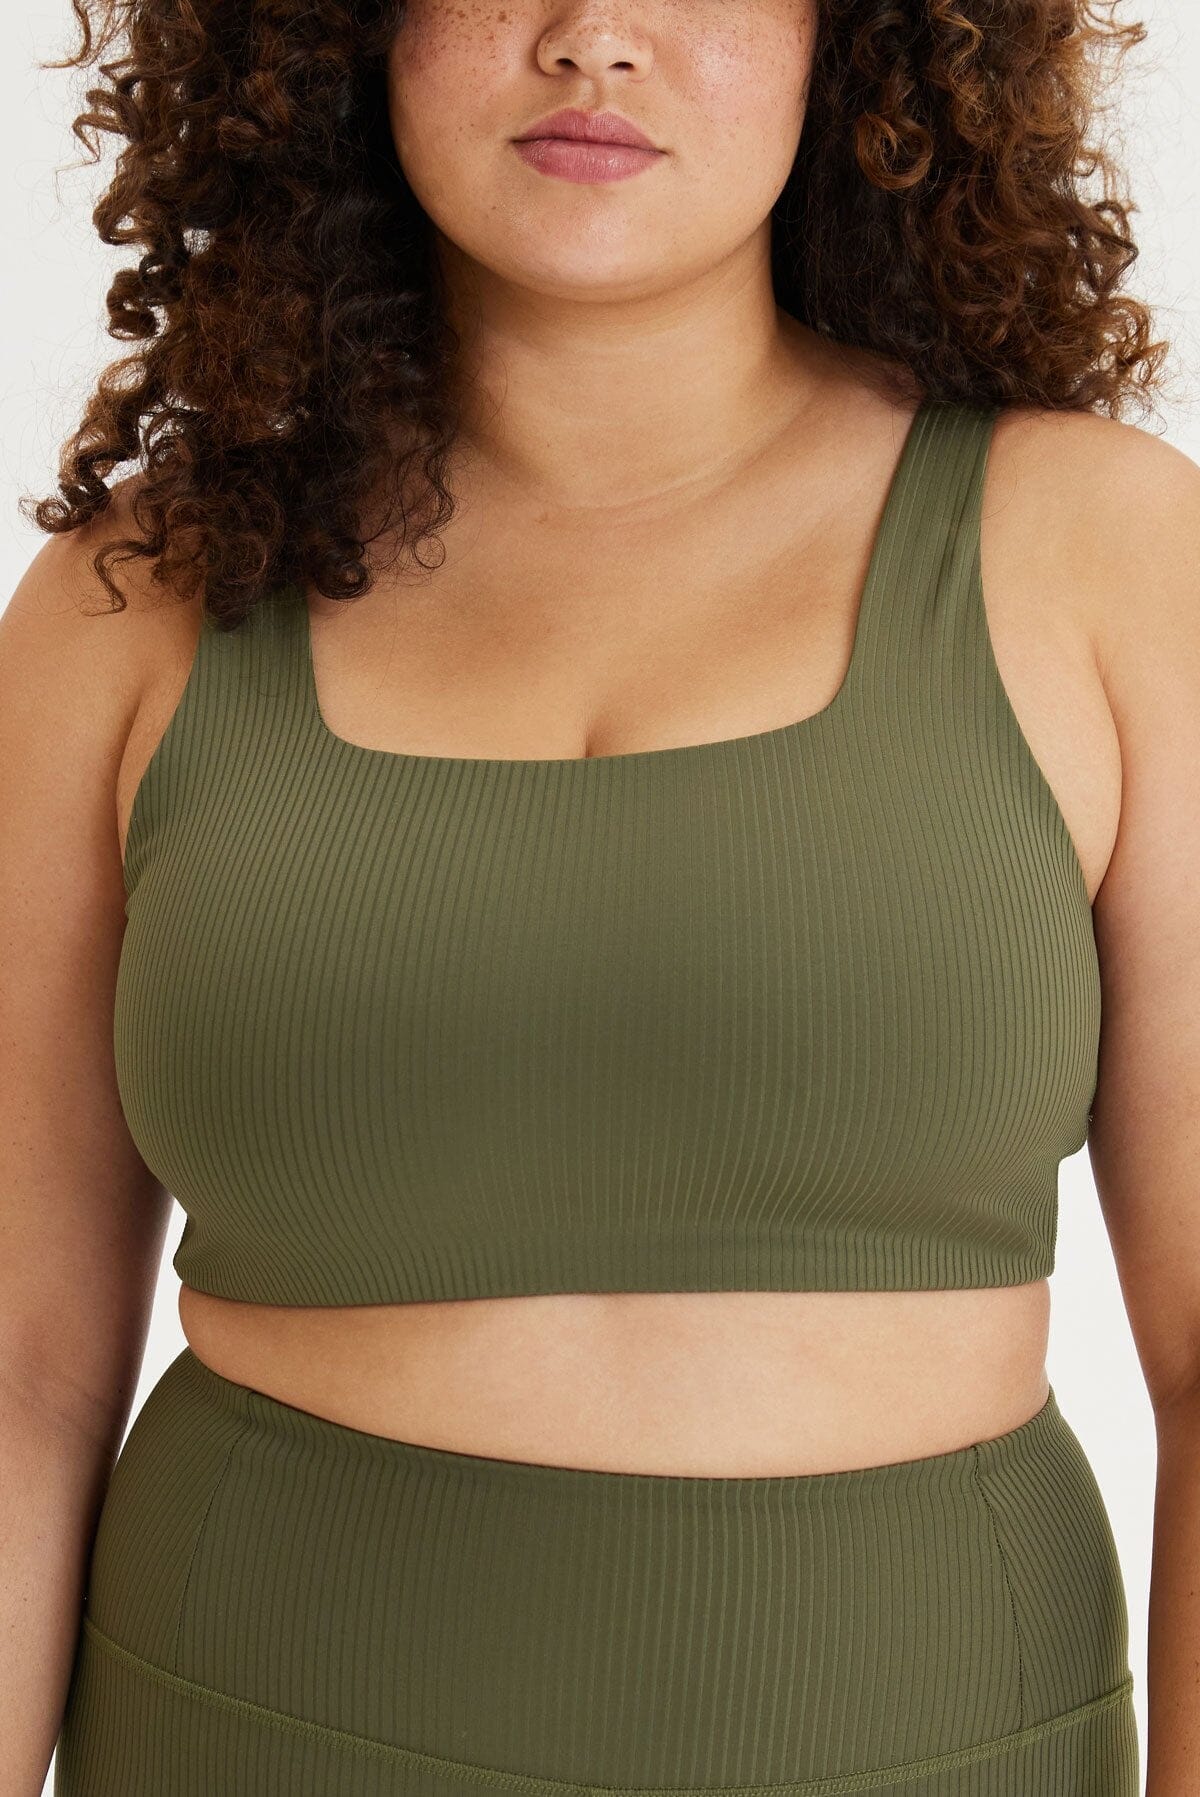 Scoop Neck Bra: Bamboo or Soy & Organic Cotton Jersey Fabric// Wire Free  Bra // Lined Crop Top // Handmade by Yana Dee Ethical Apparel 